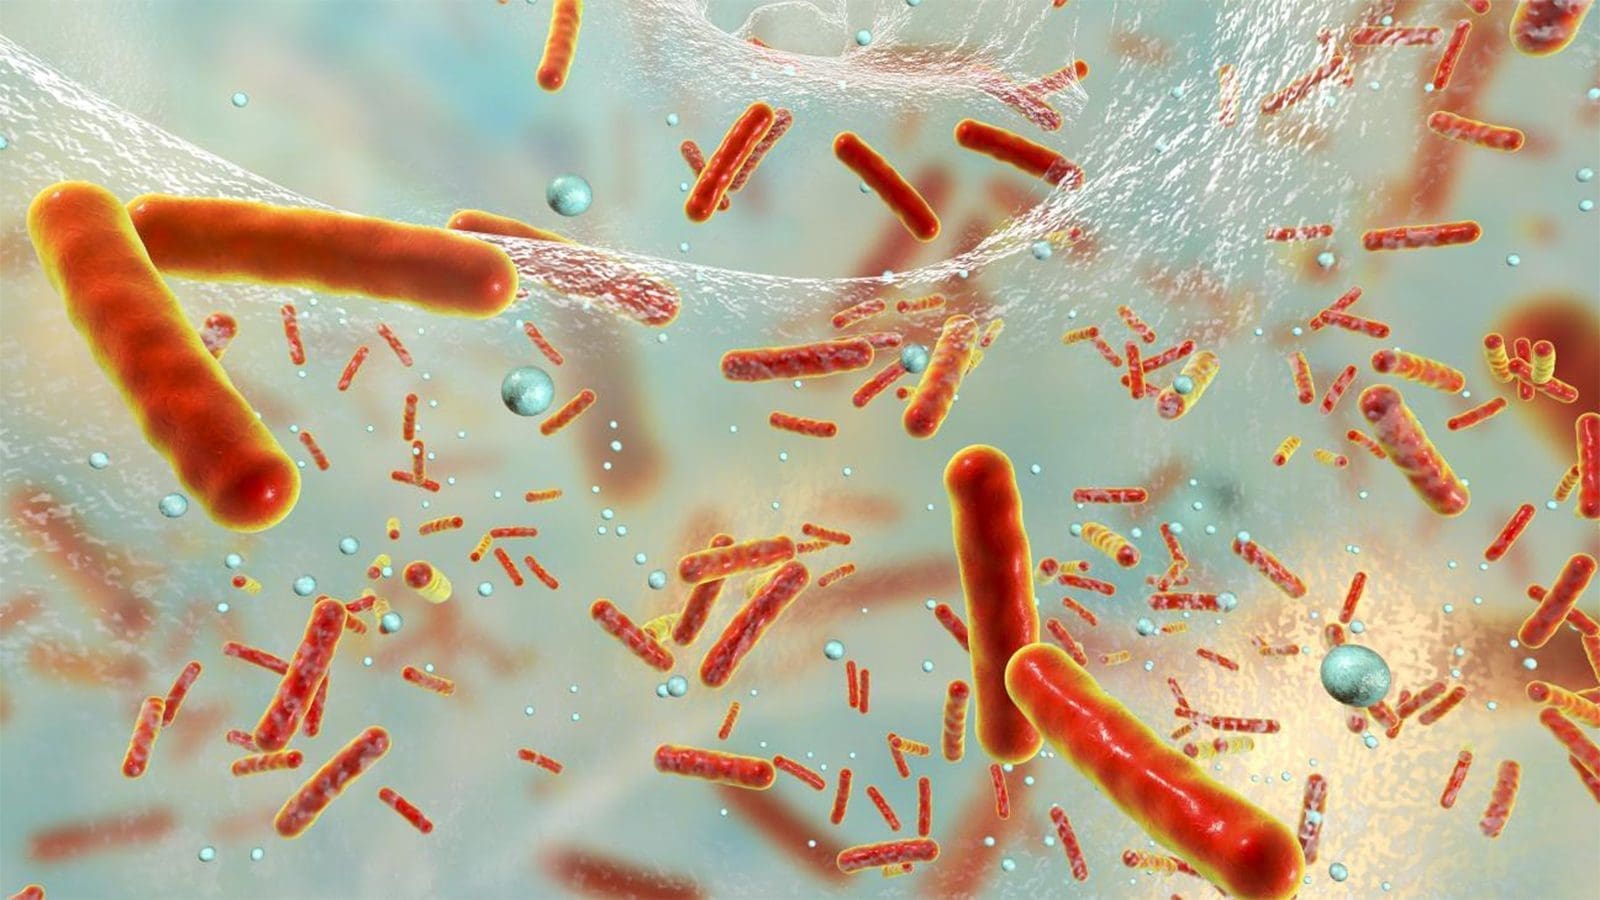 Study shows antibiotic resistance in Salmonella, Campylobacter still on rise